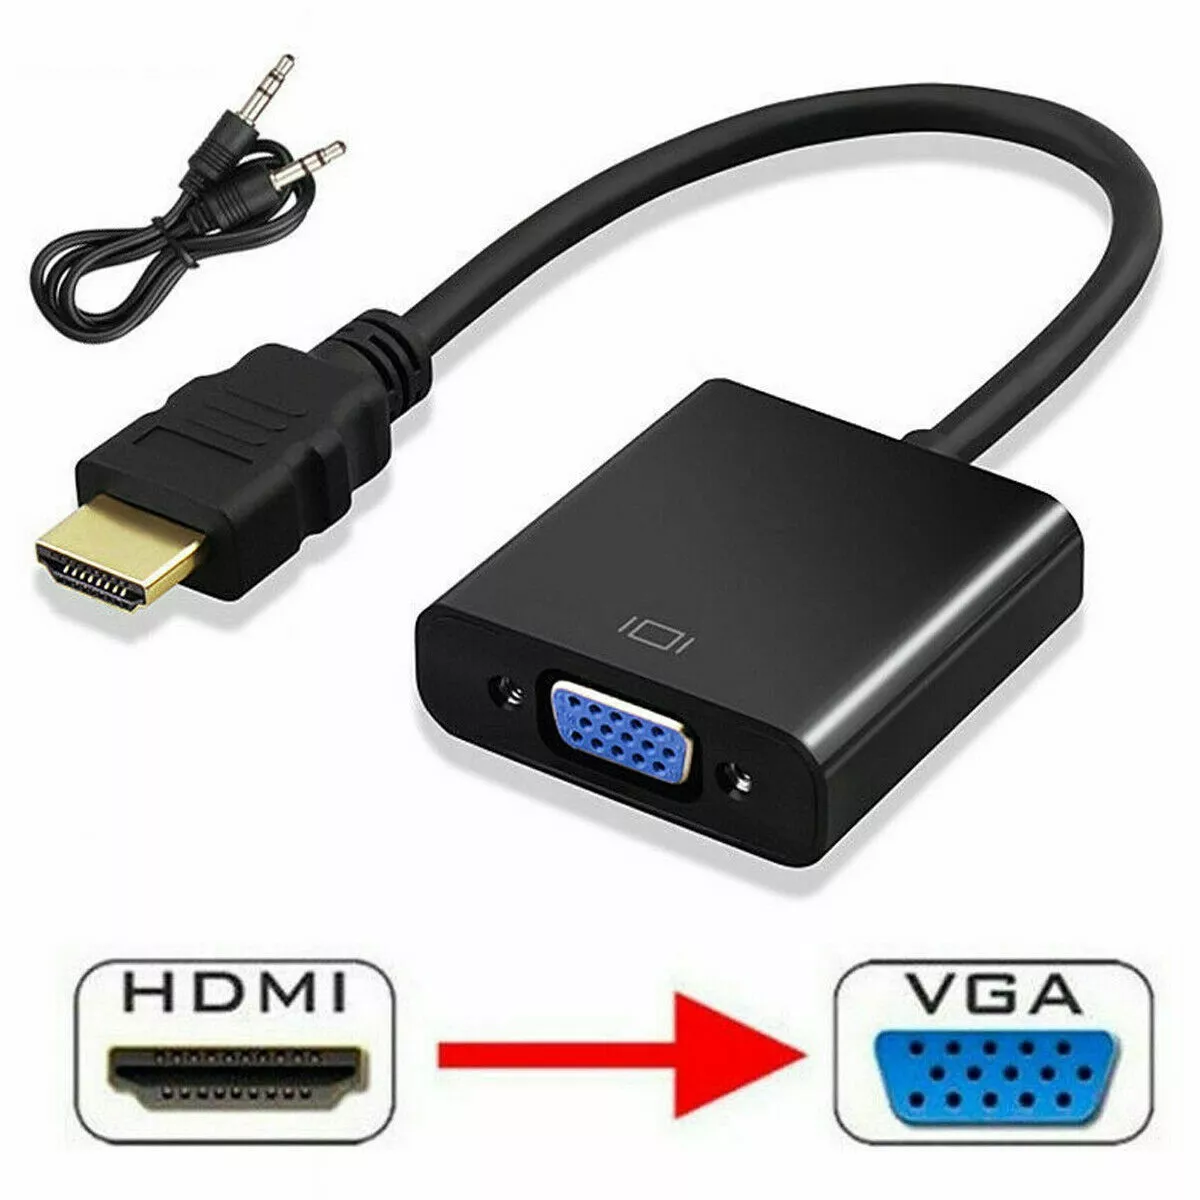 https://www.xgamertechnologies.com/images/products/HDMI male to female VGA cord.webp